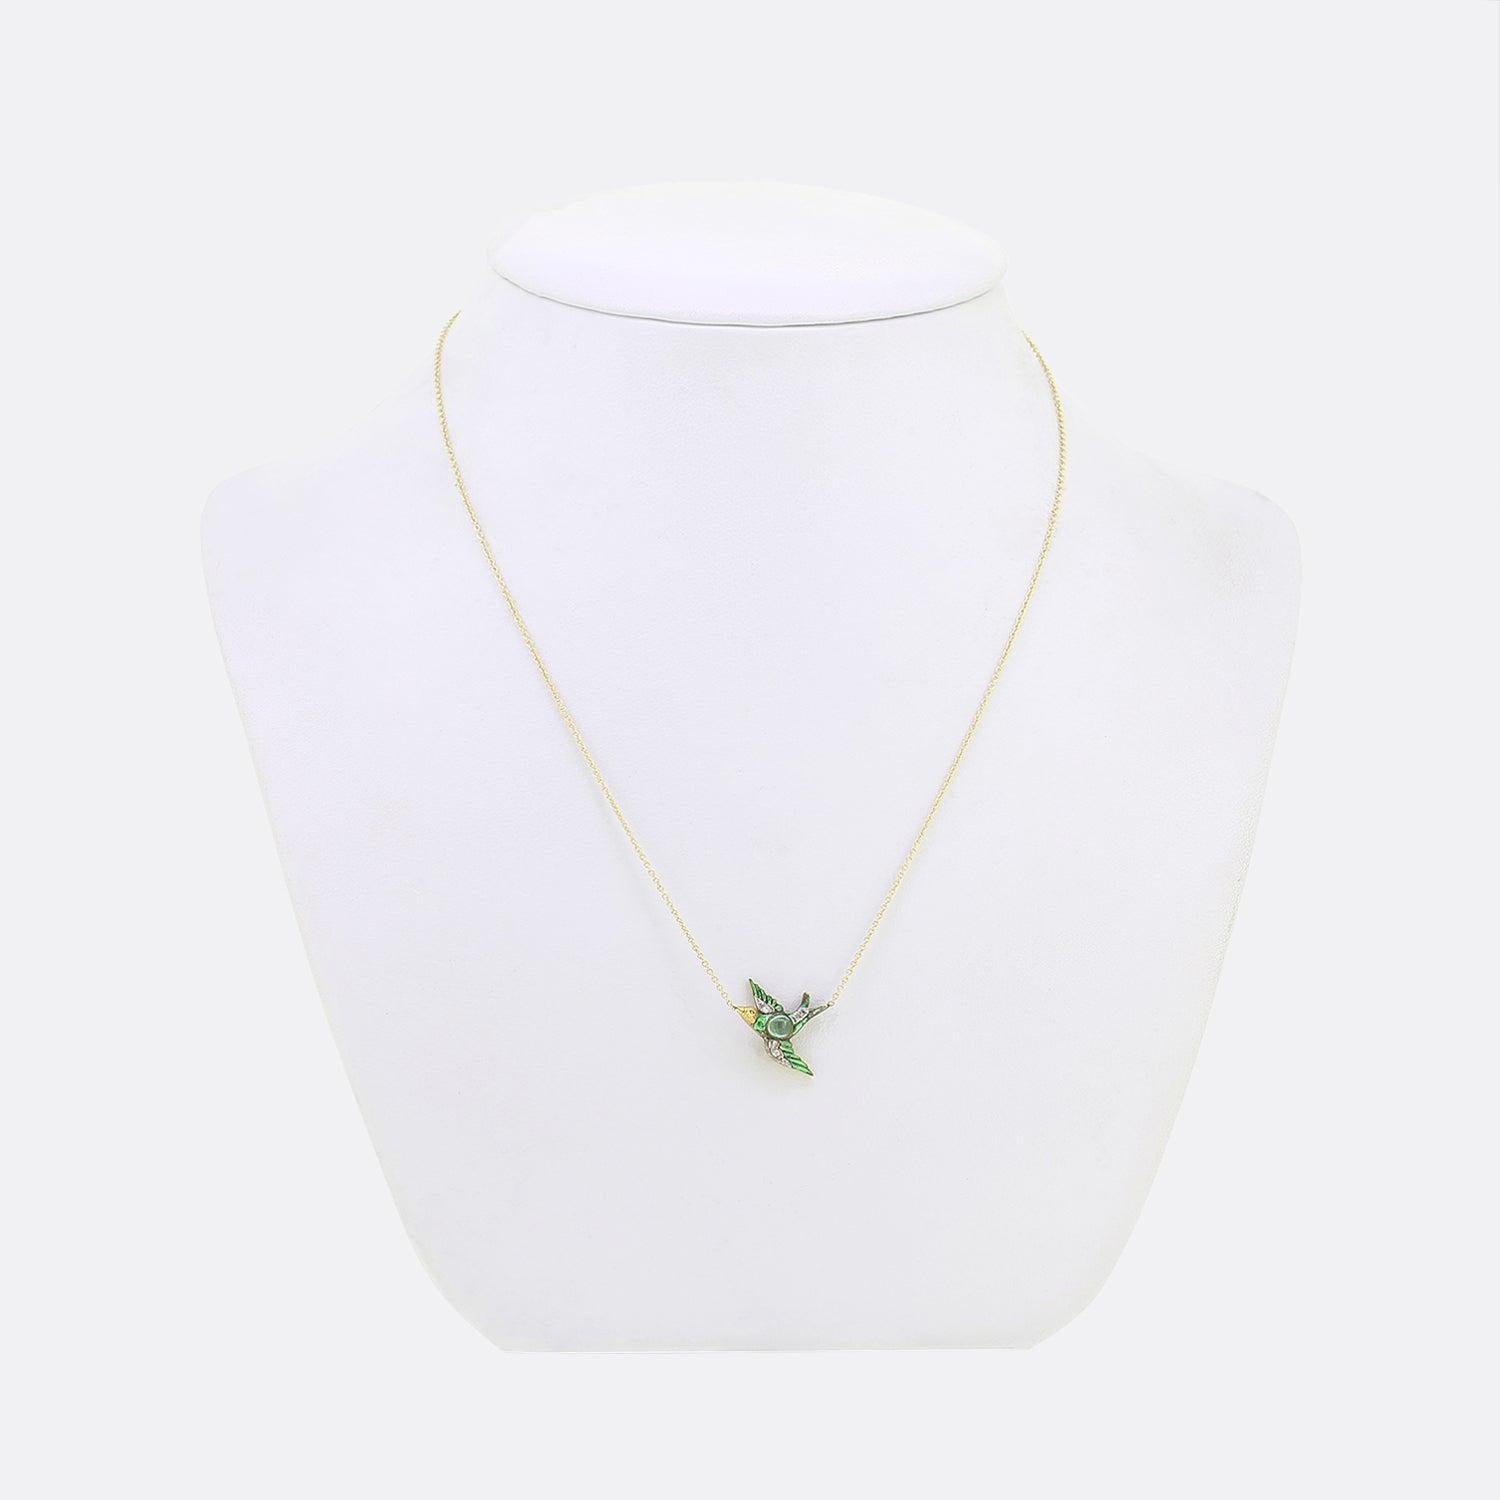 Here we have a beautiful vintage gem set necklace. This piece showcases a charming antique pendant which has been crafted into the shape of a mid flight bird. Exceptional attention to detail has been paid here with the fine multilayered wings